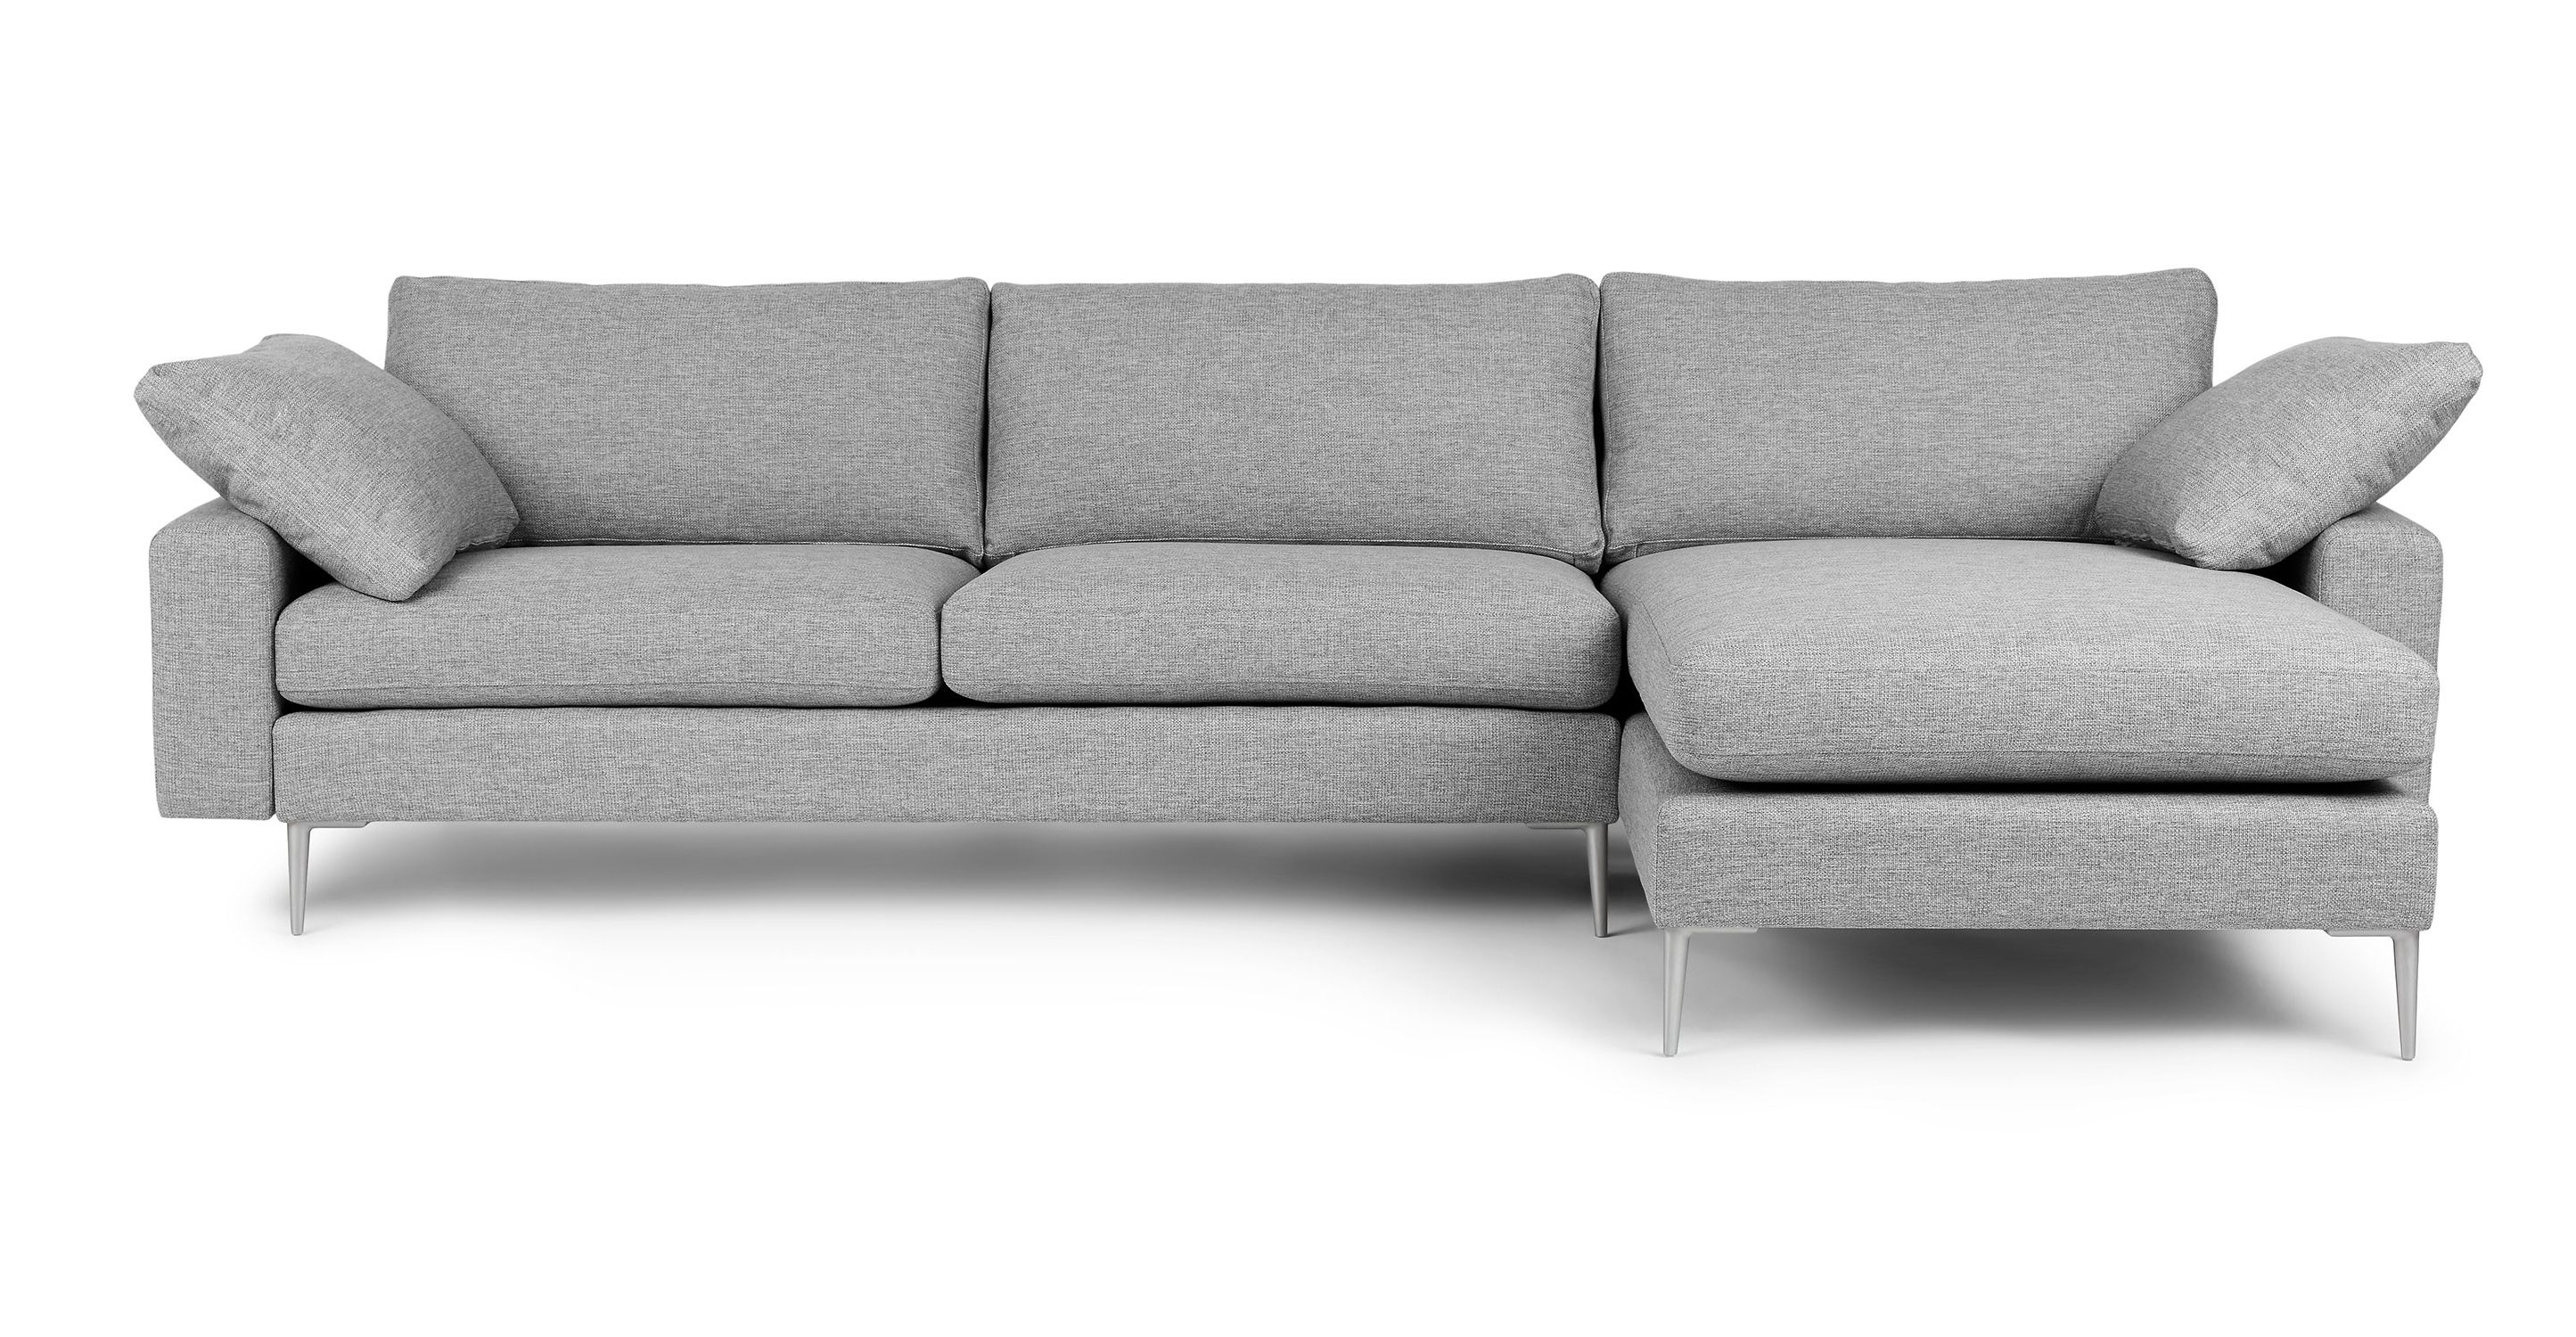 Winter Gray Reversible Fabric Sectional | Nova | Article With Reversible Sectional Sofas (Gallery 9 of 20)